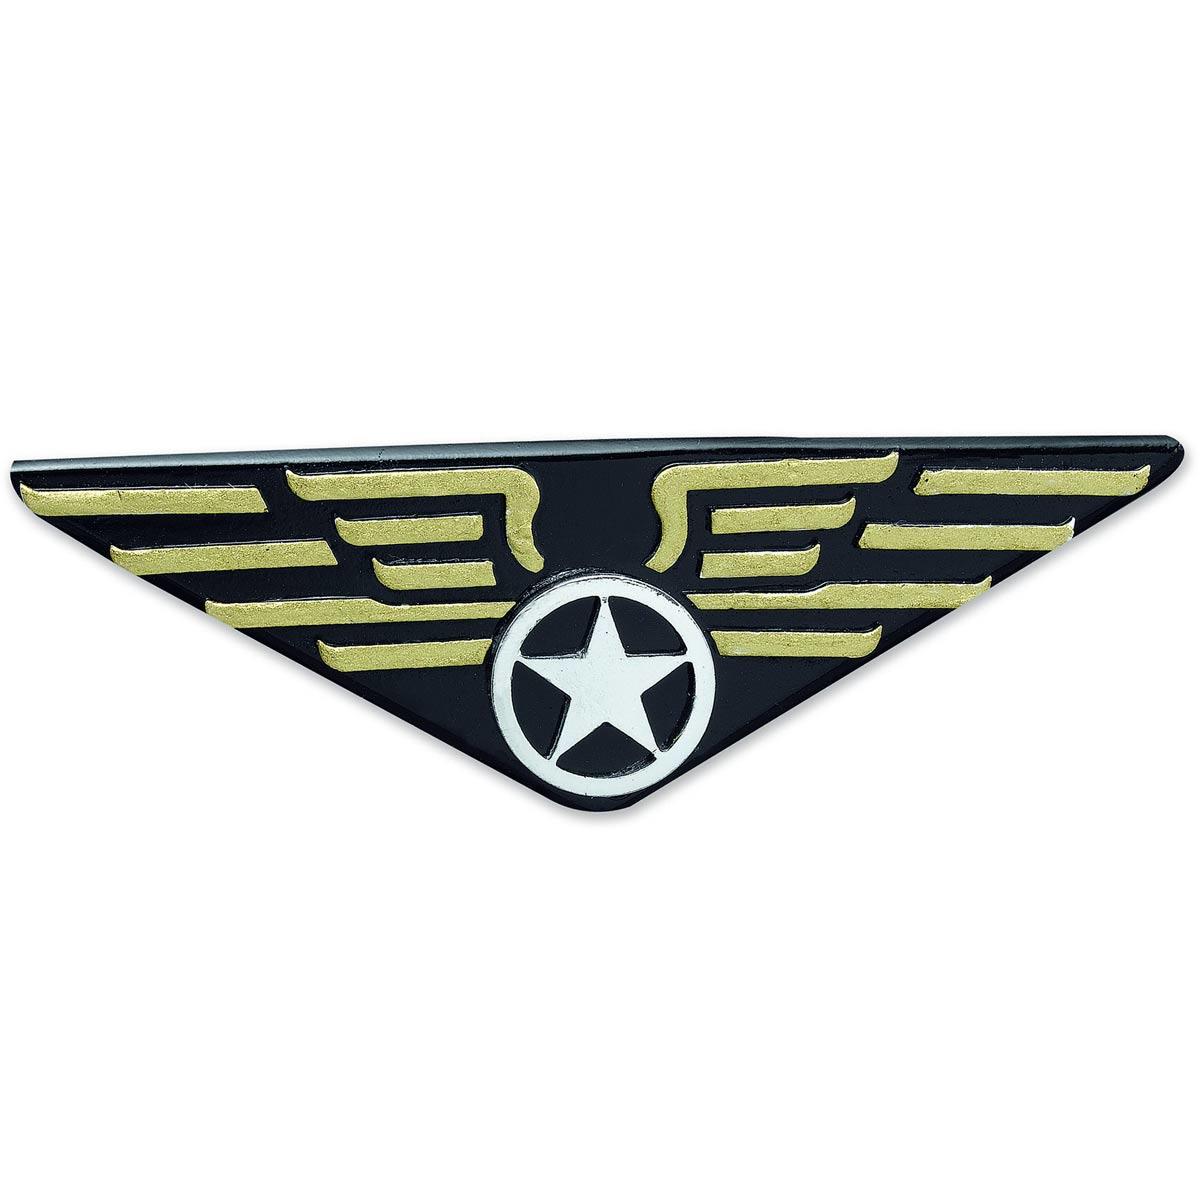 Aircrew and Stewardess's Flying Badge by B Novs BA905 available here at Karnival Costumes online party shop